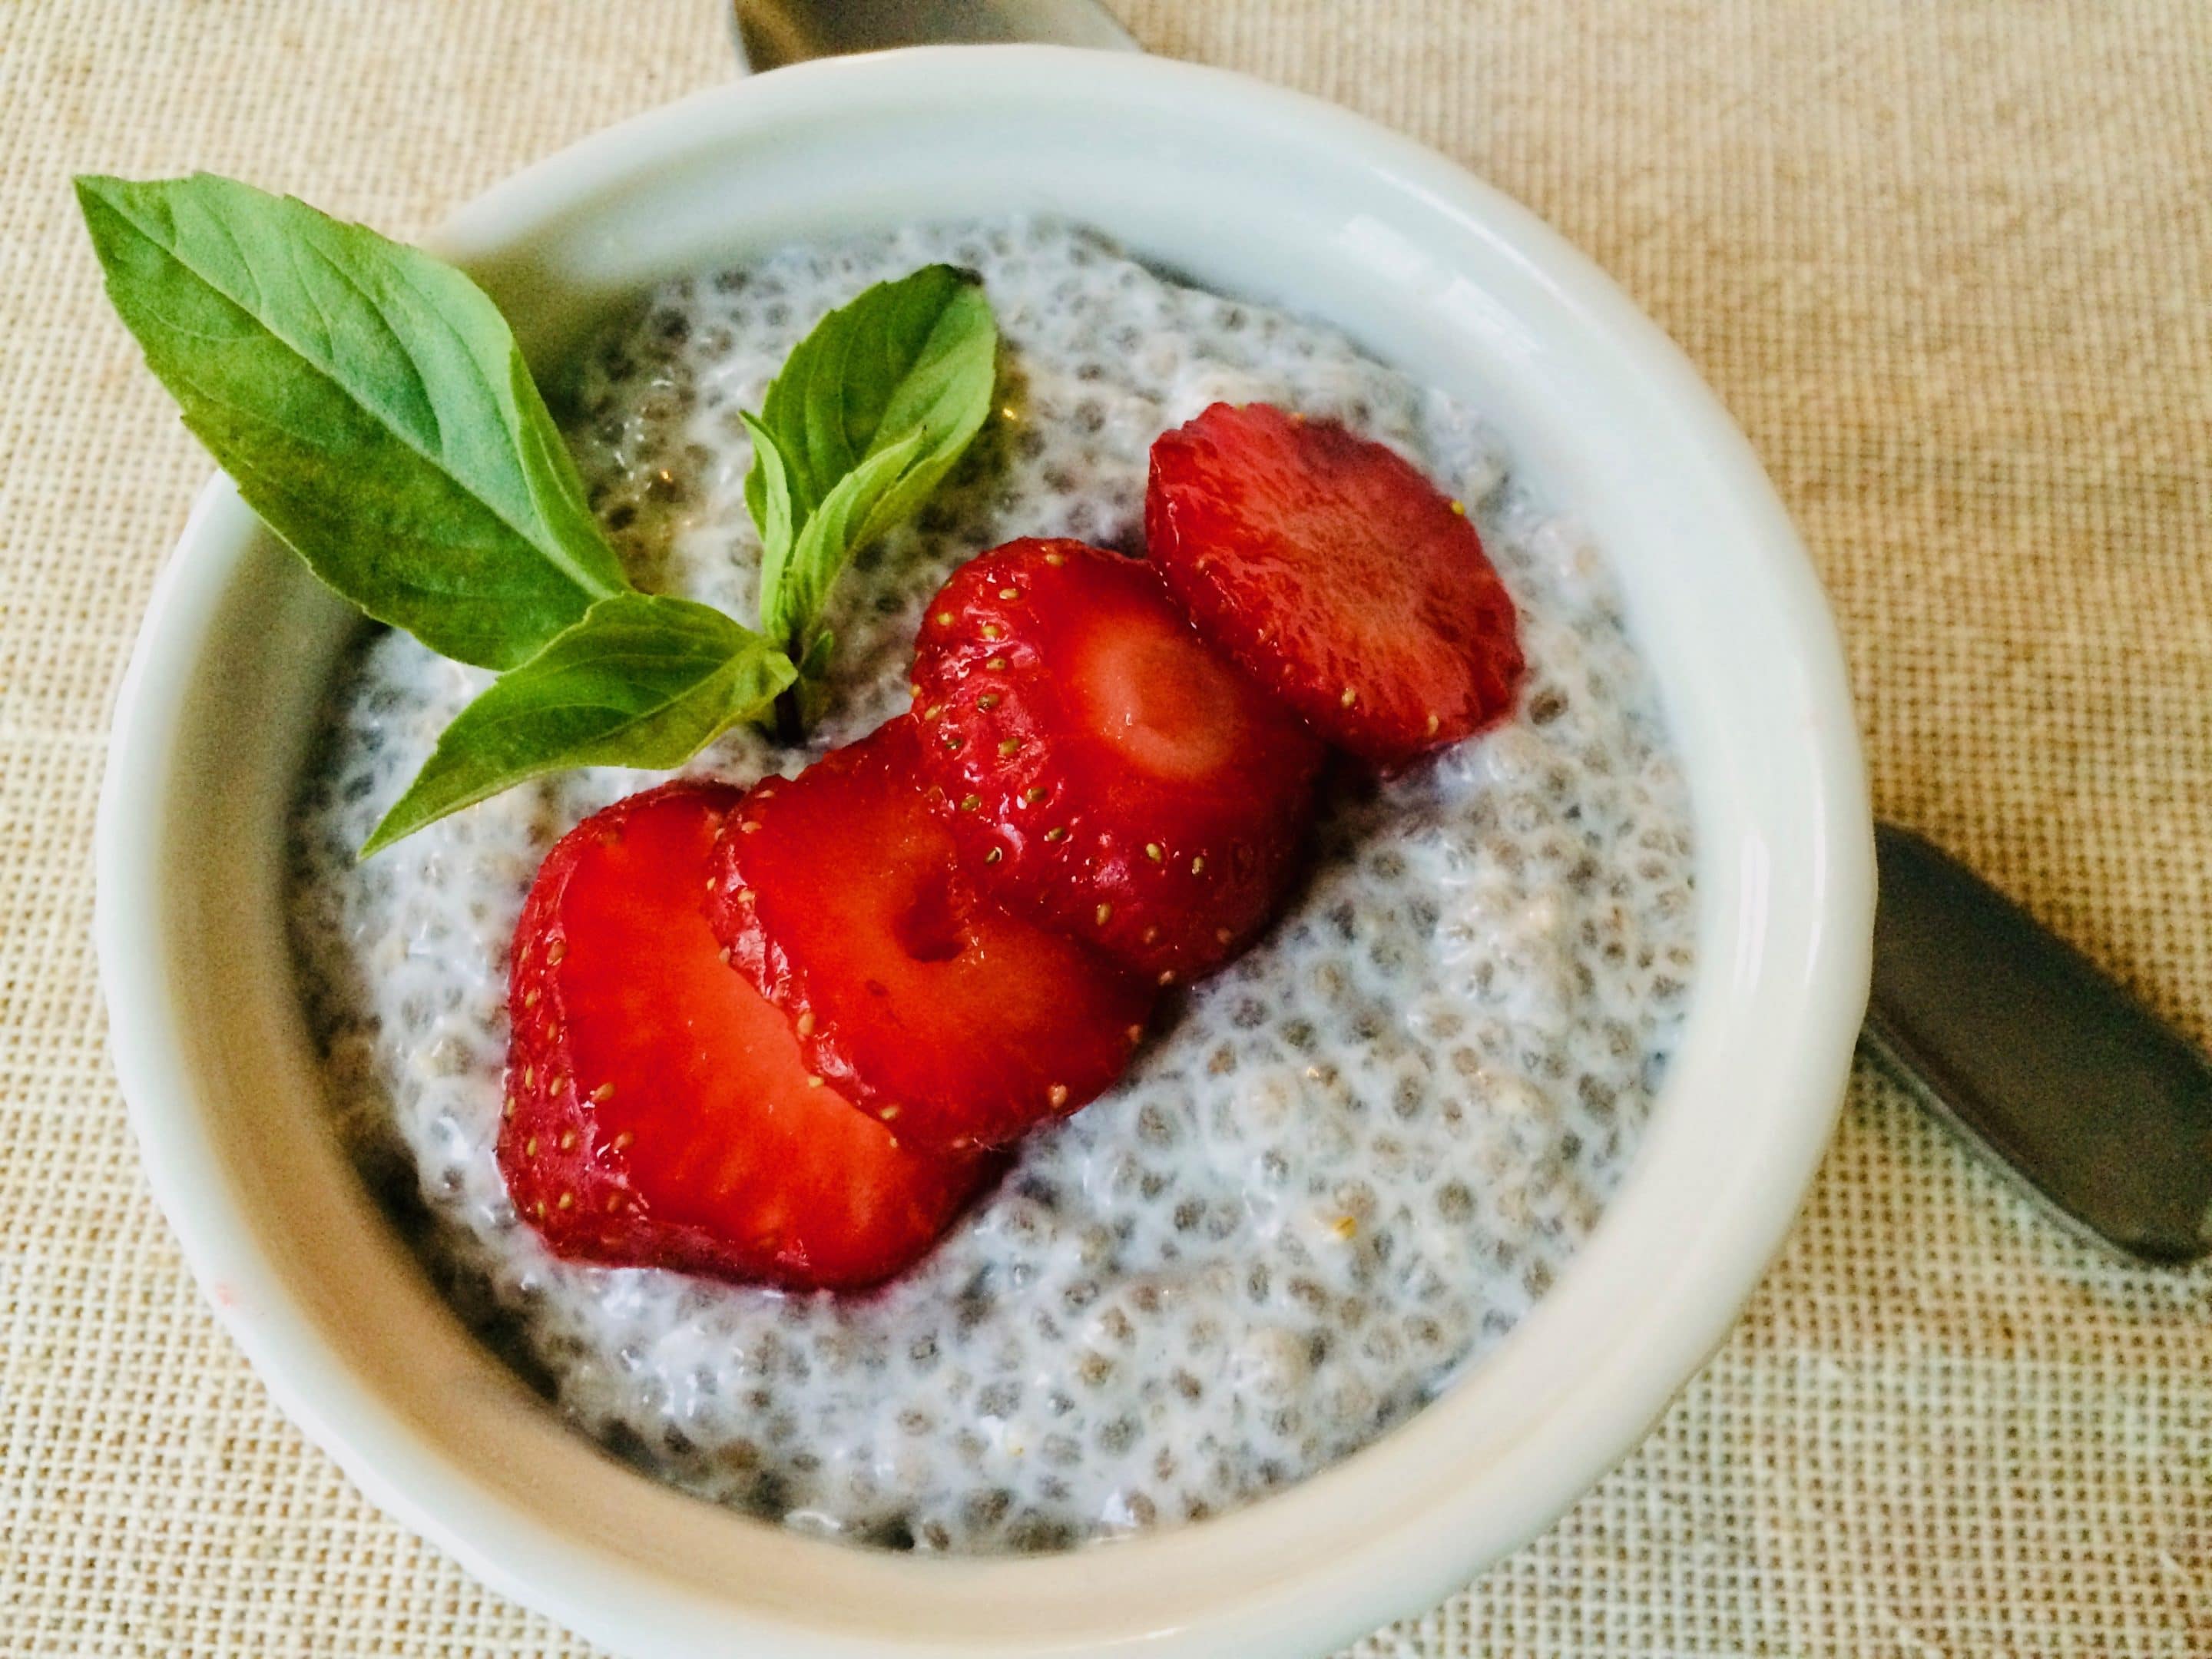 Chia Pudding topped with Strawberries